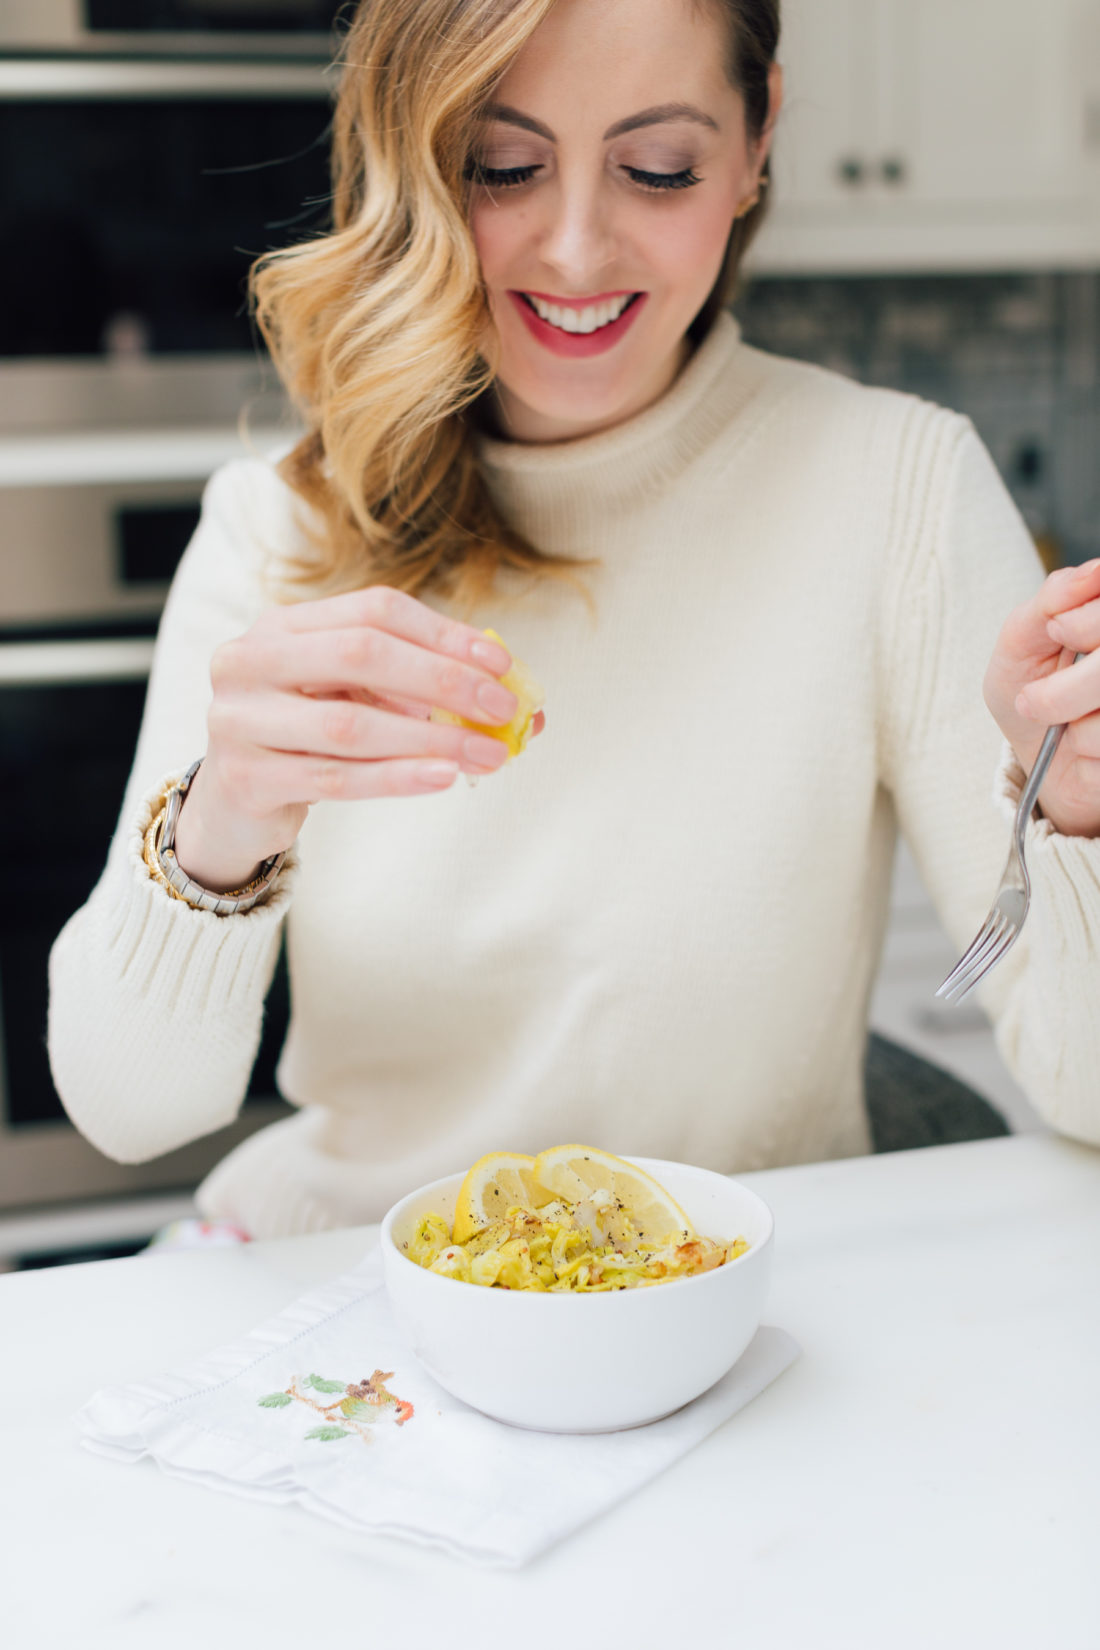 Eva Amurri Martino enjoys her Brussels Sprouts side dish with a squeeze of lemon